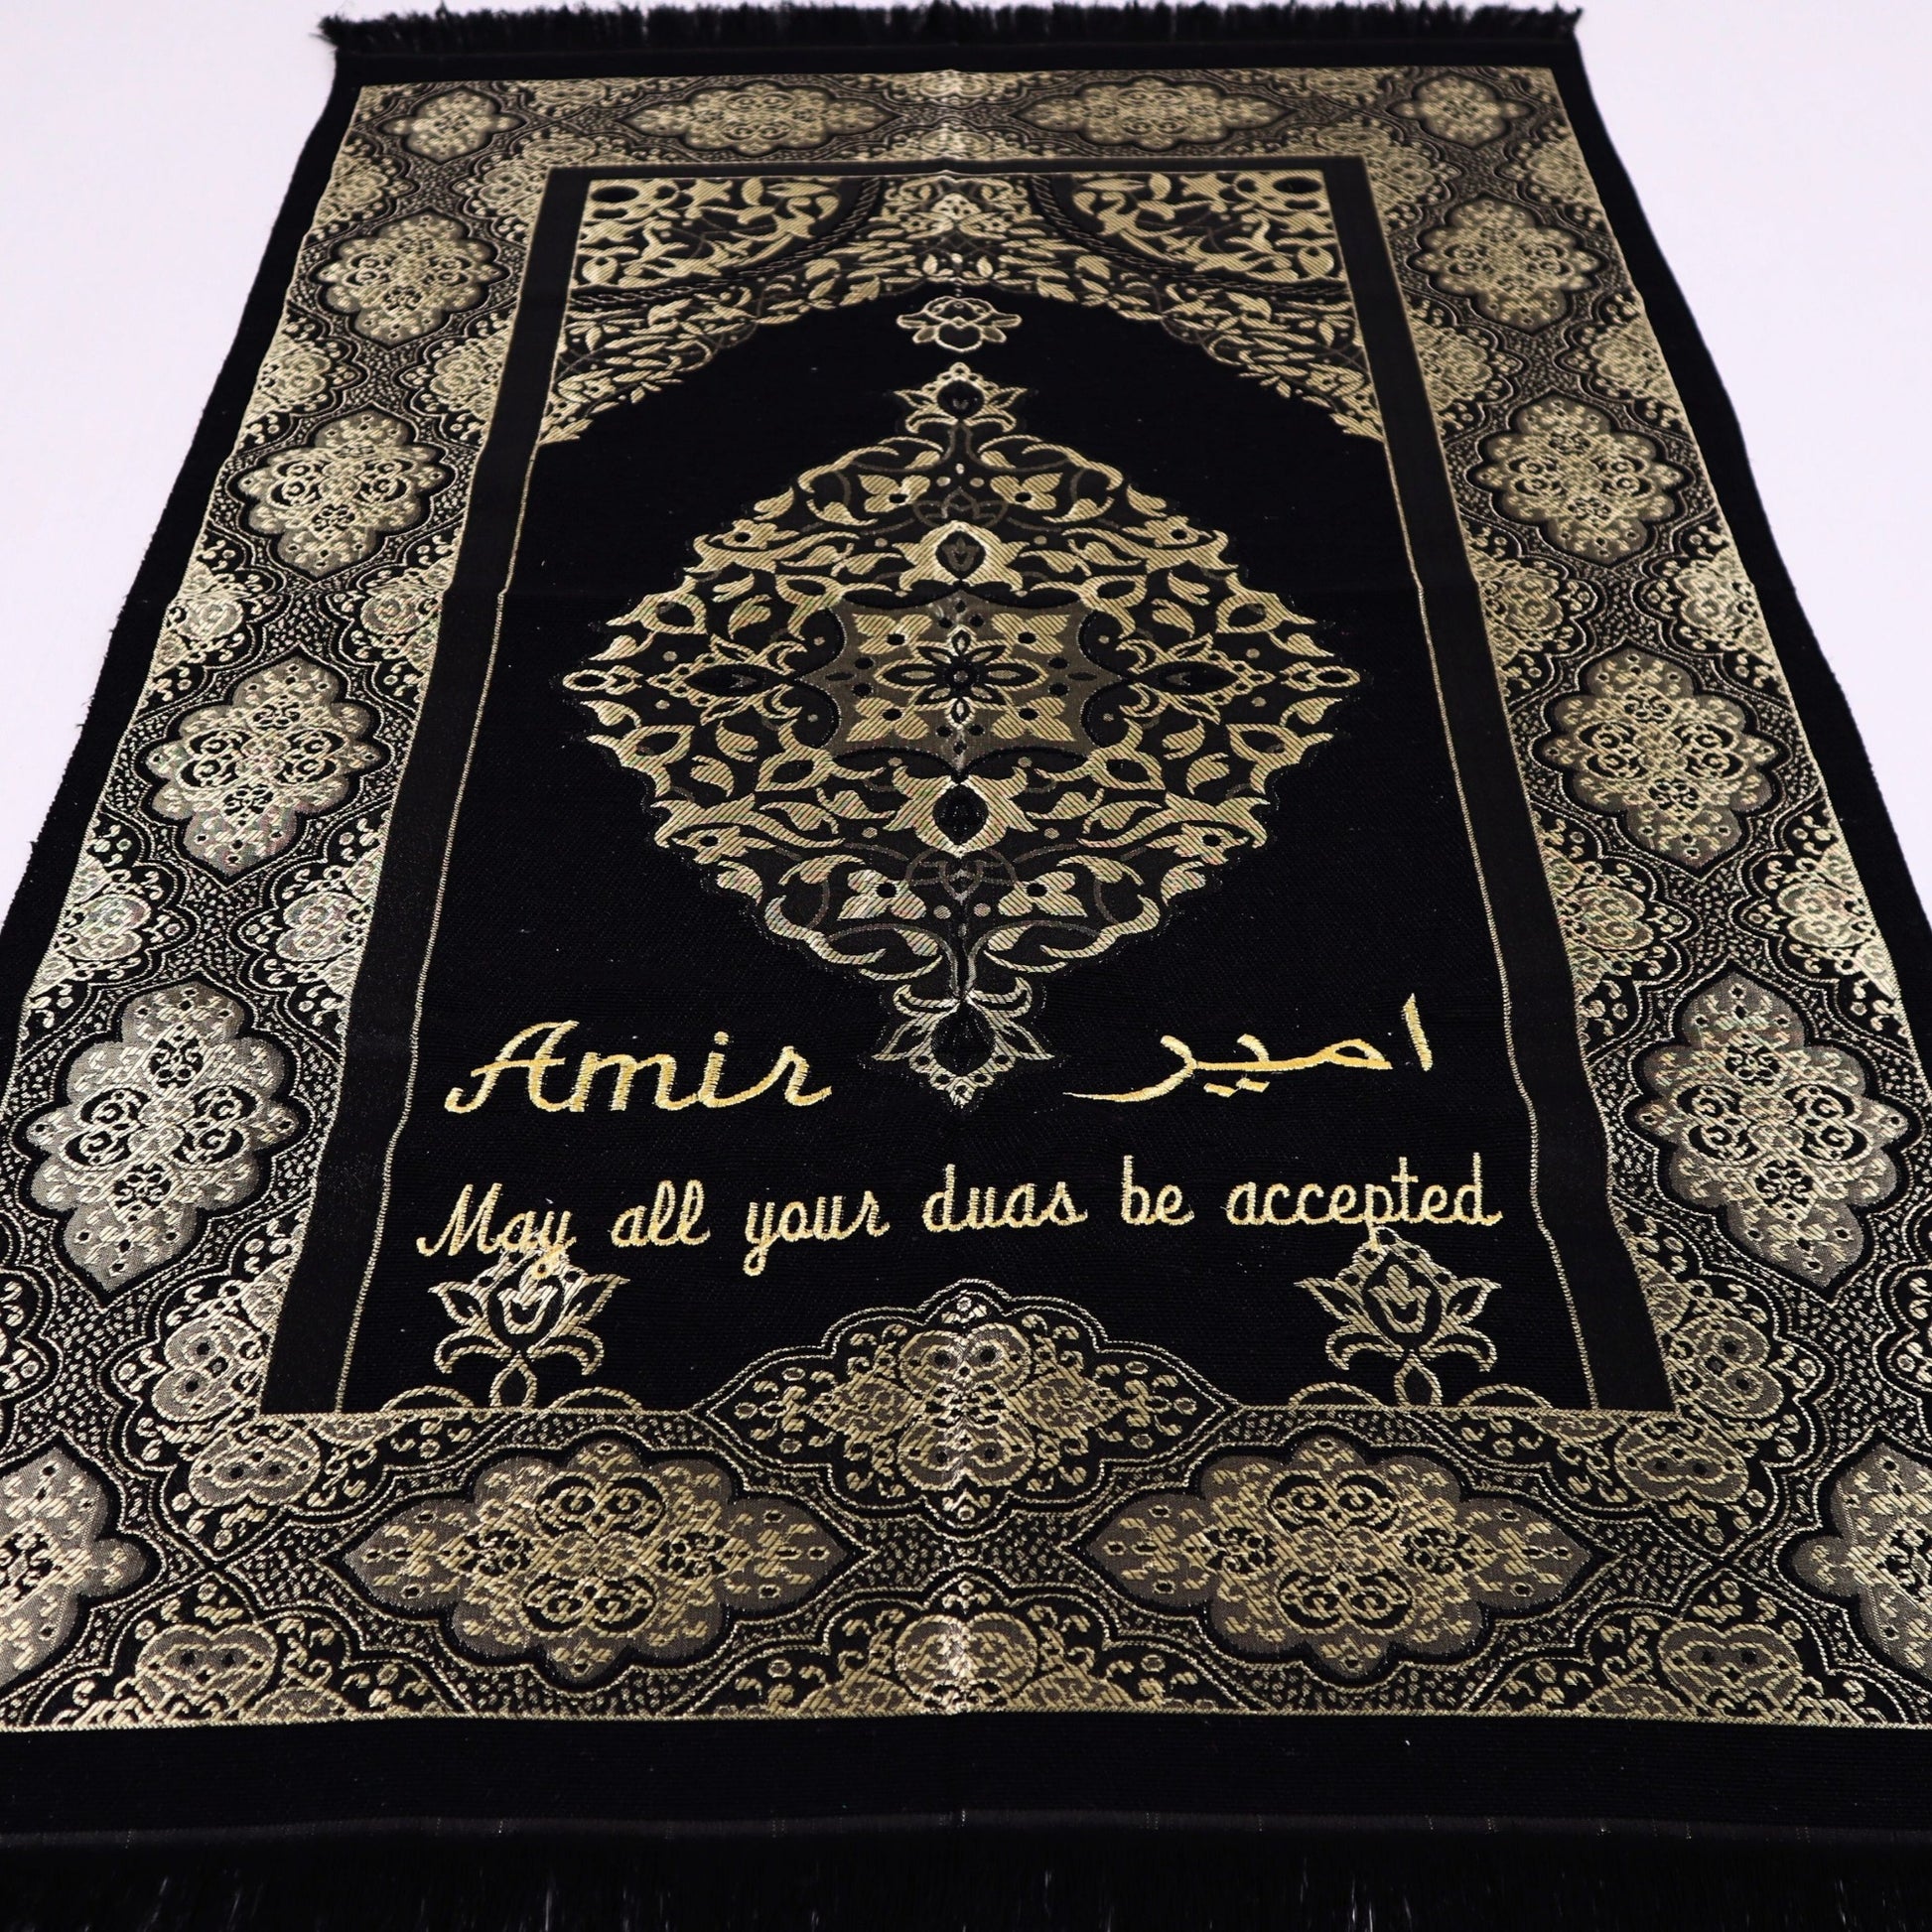 Personalized Travel Prayer Mat Quran Tasbeeh Islamic Muslim Gift Set - Islamic Elite Favors is a handmade gift shop offering a wide variety of unique and personalized gifts for all occasions. Whether you're looking for the perfect Ramadan, Eid, Hajj, wedding gift or something special for a birthday, baby shower or anniversary, we have something for everyone. High quality, made with love.